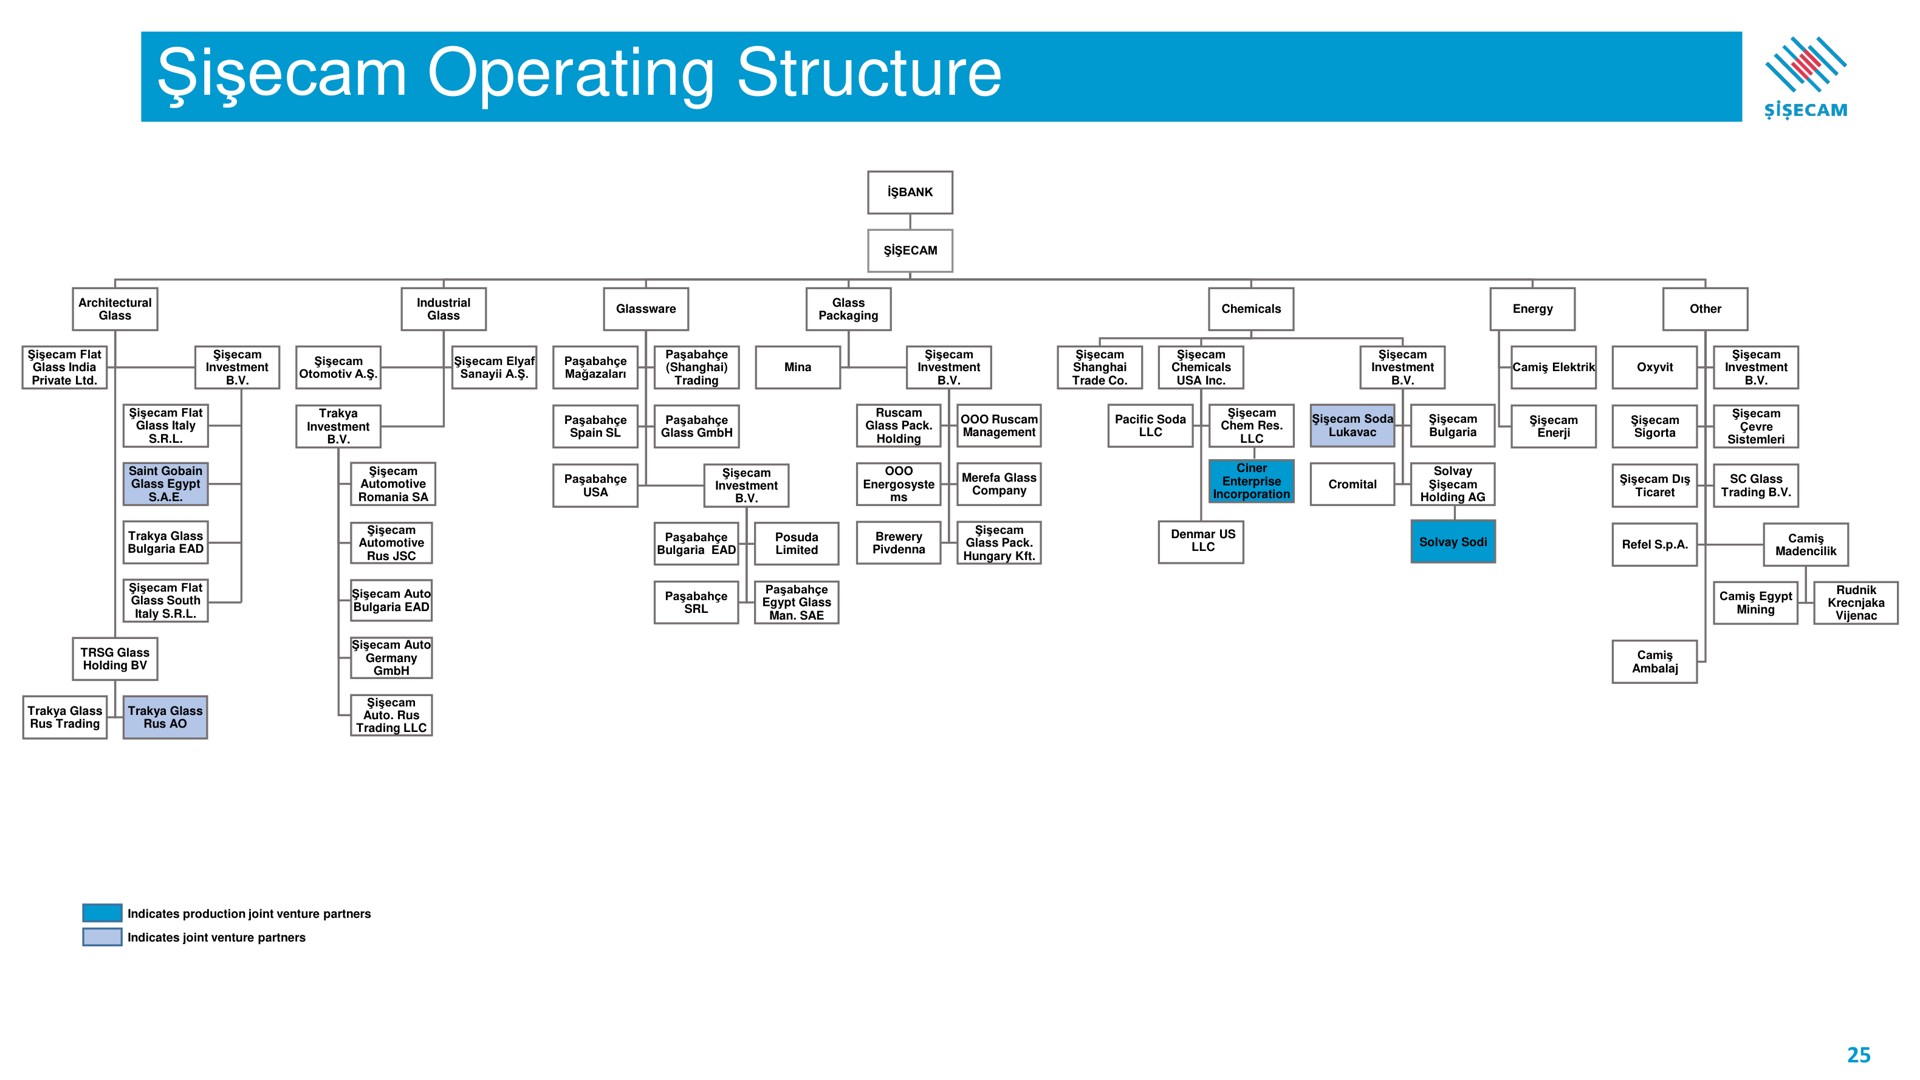 i operating structure | Sisecam Resources